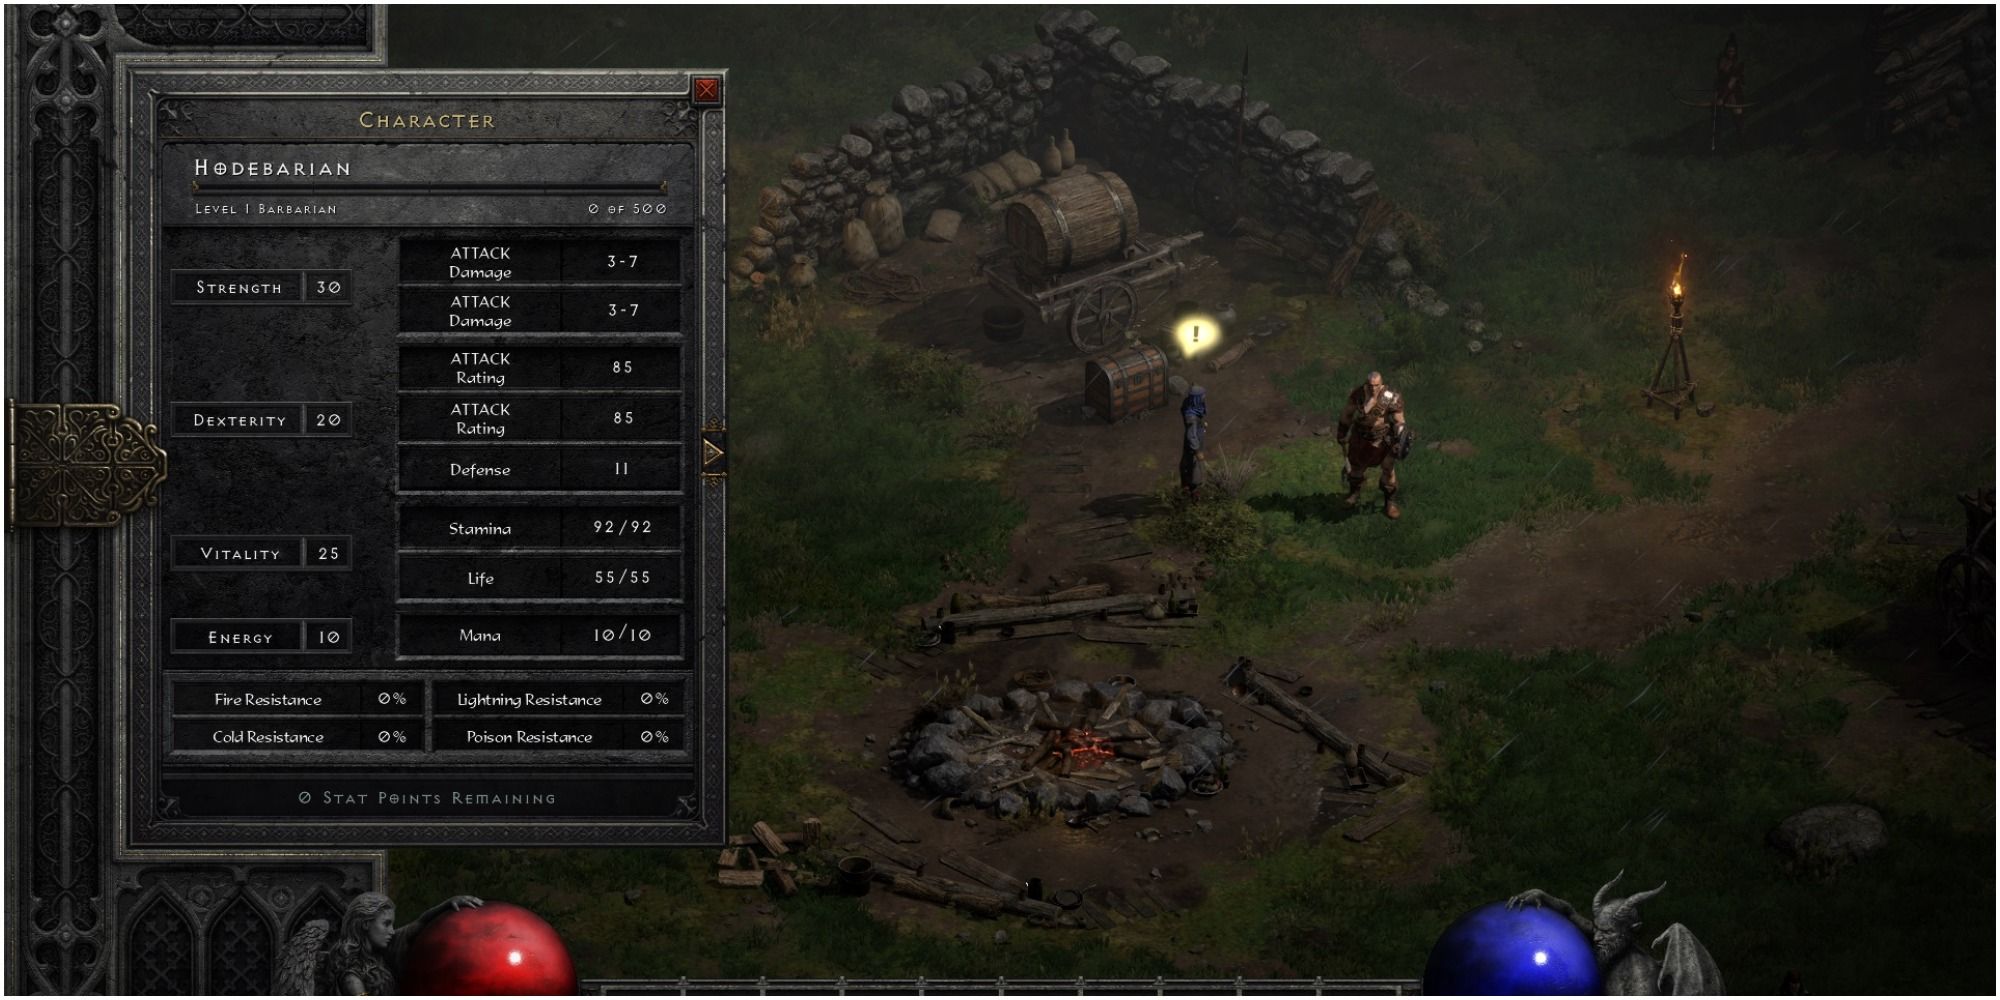 Diablo 2 Resurrected Character Sheet For A Level One Barbarian